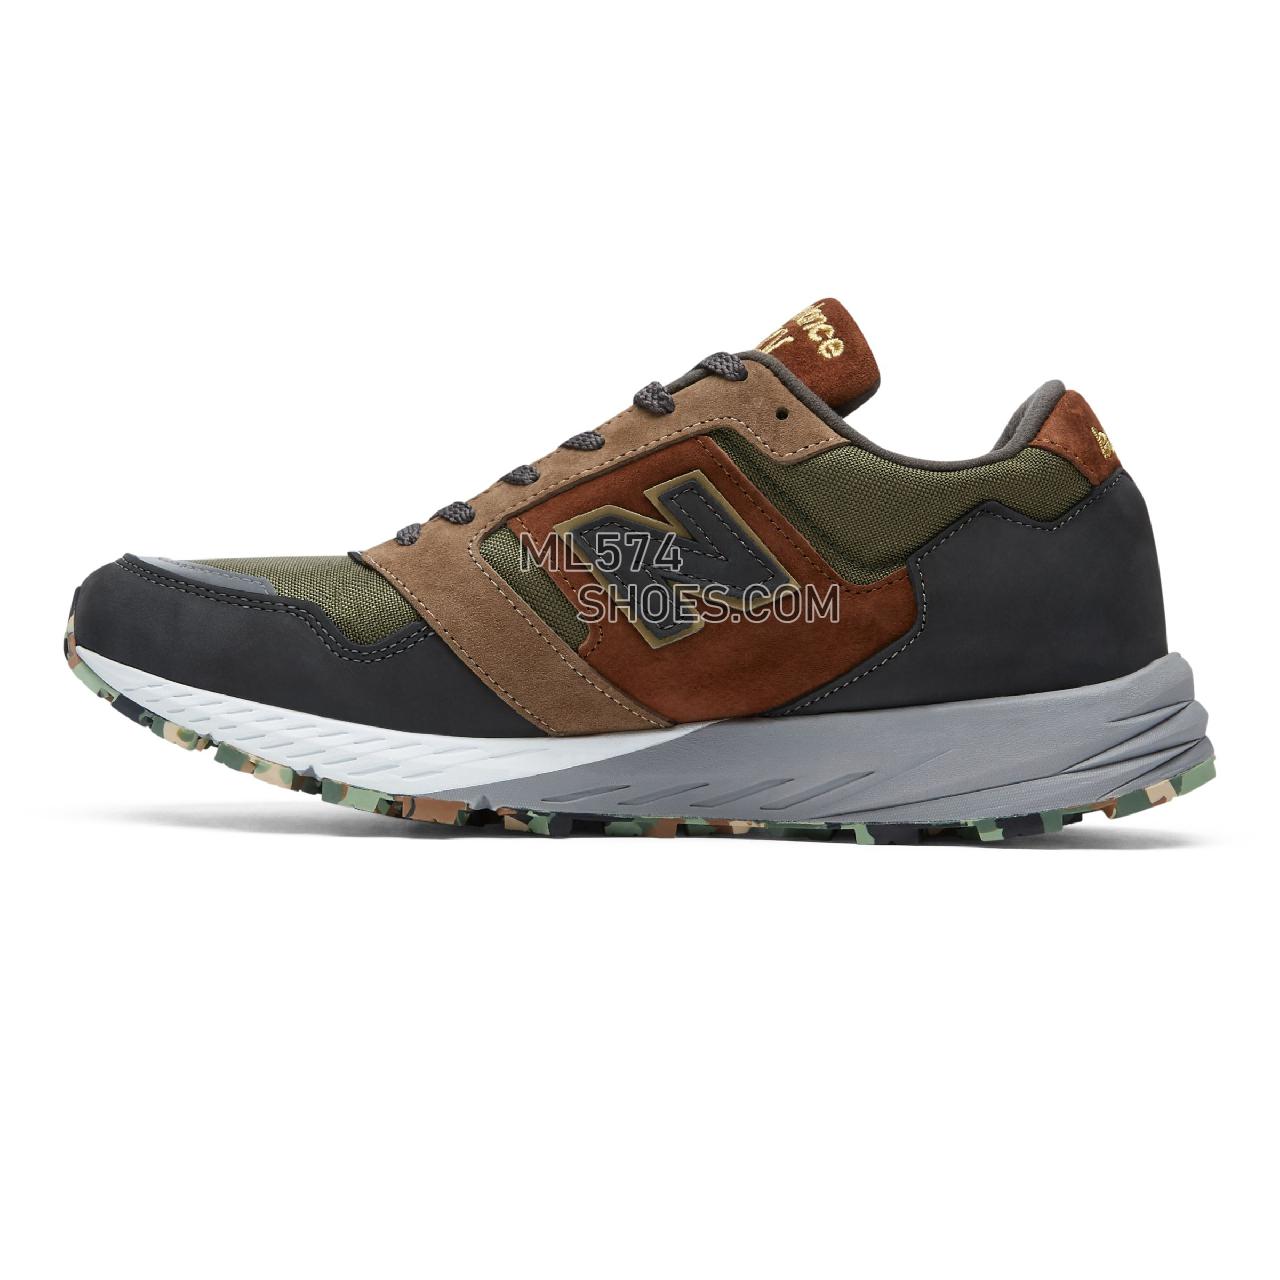 New Balance Made in UK 575 - Men's Made in UK 575 Classic MTL575V1-27394-M - Dark Green with Brown and Black - MTL575SO